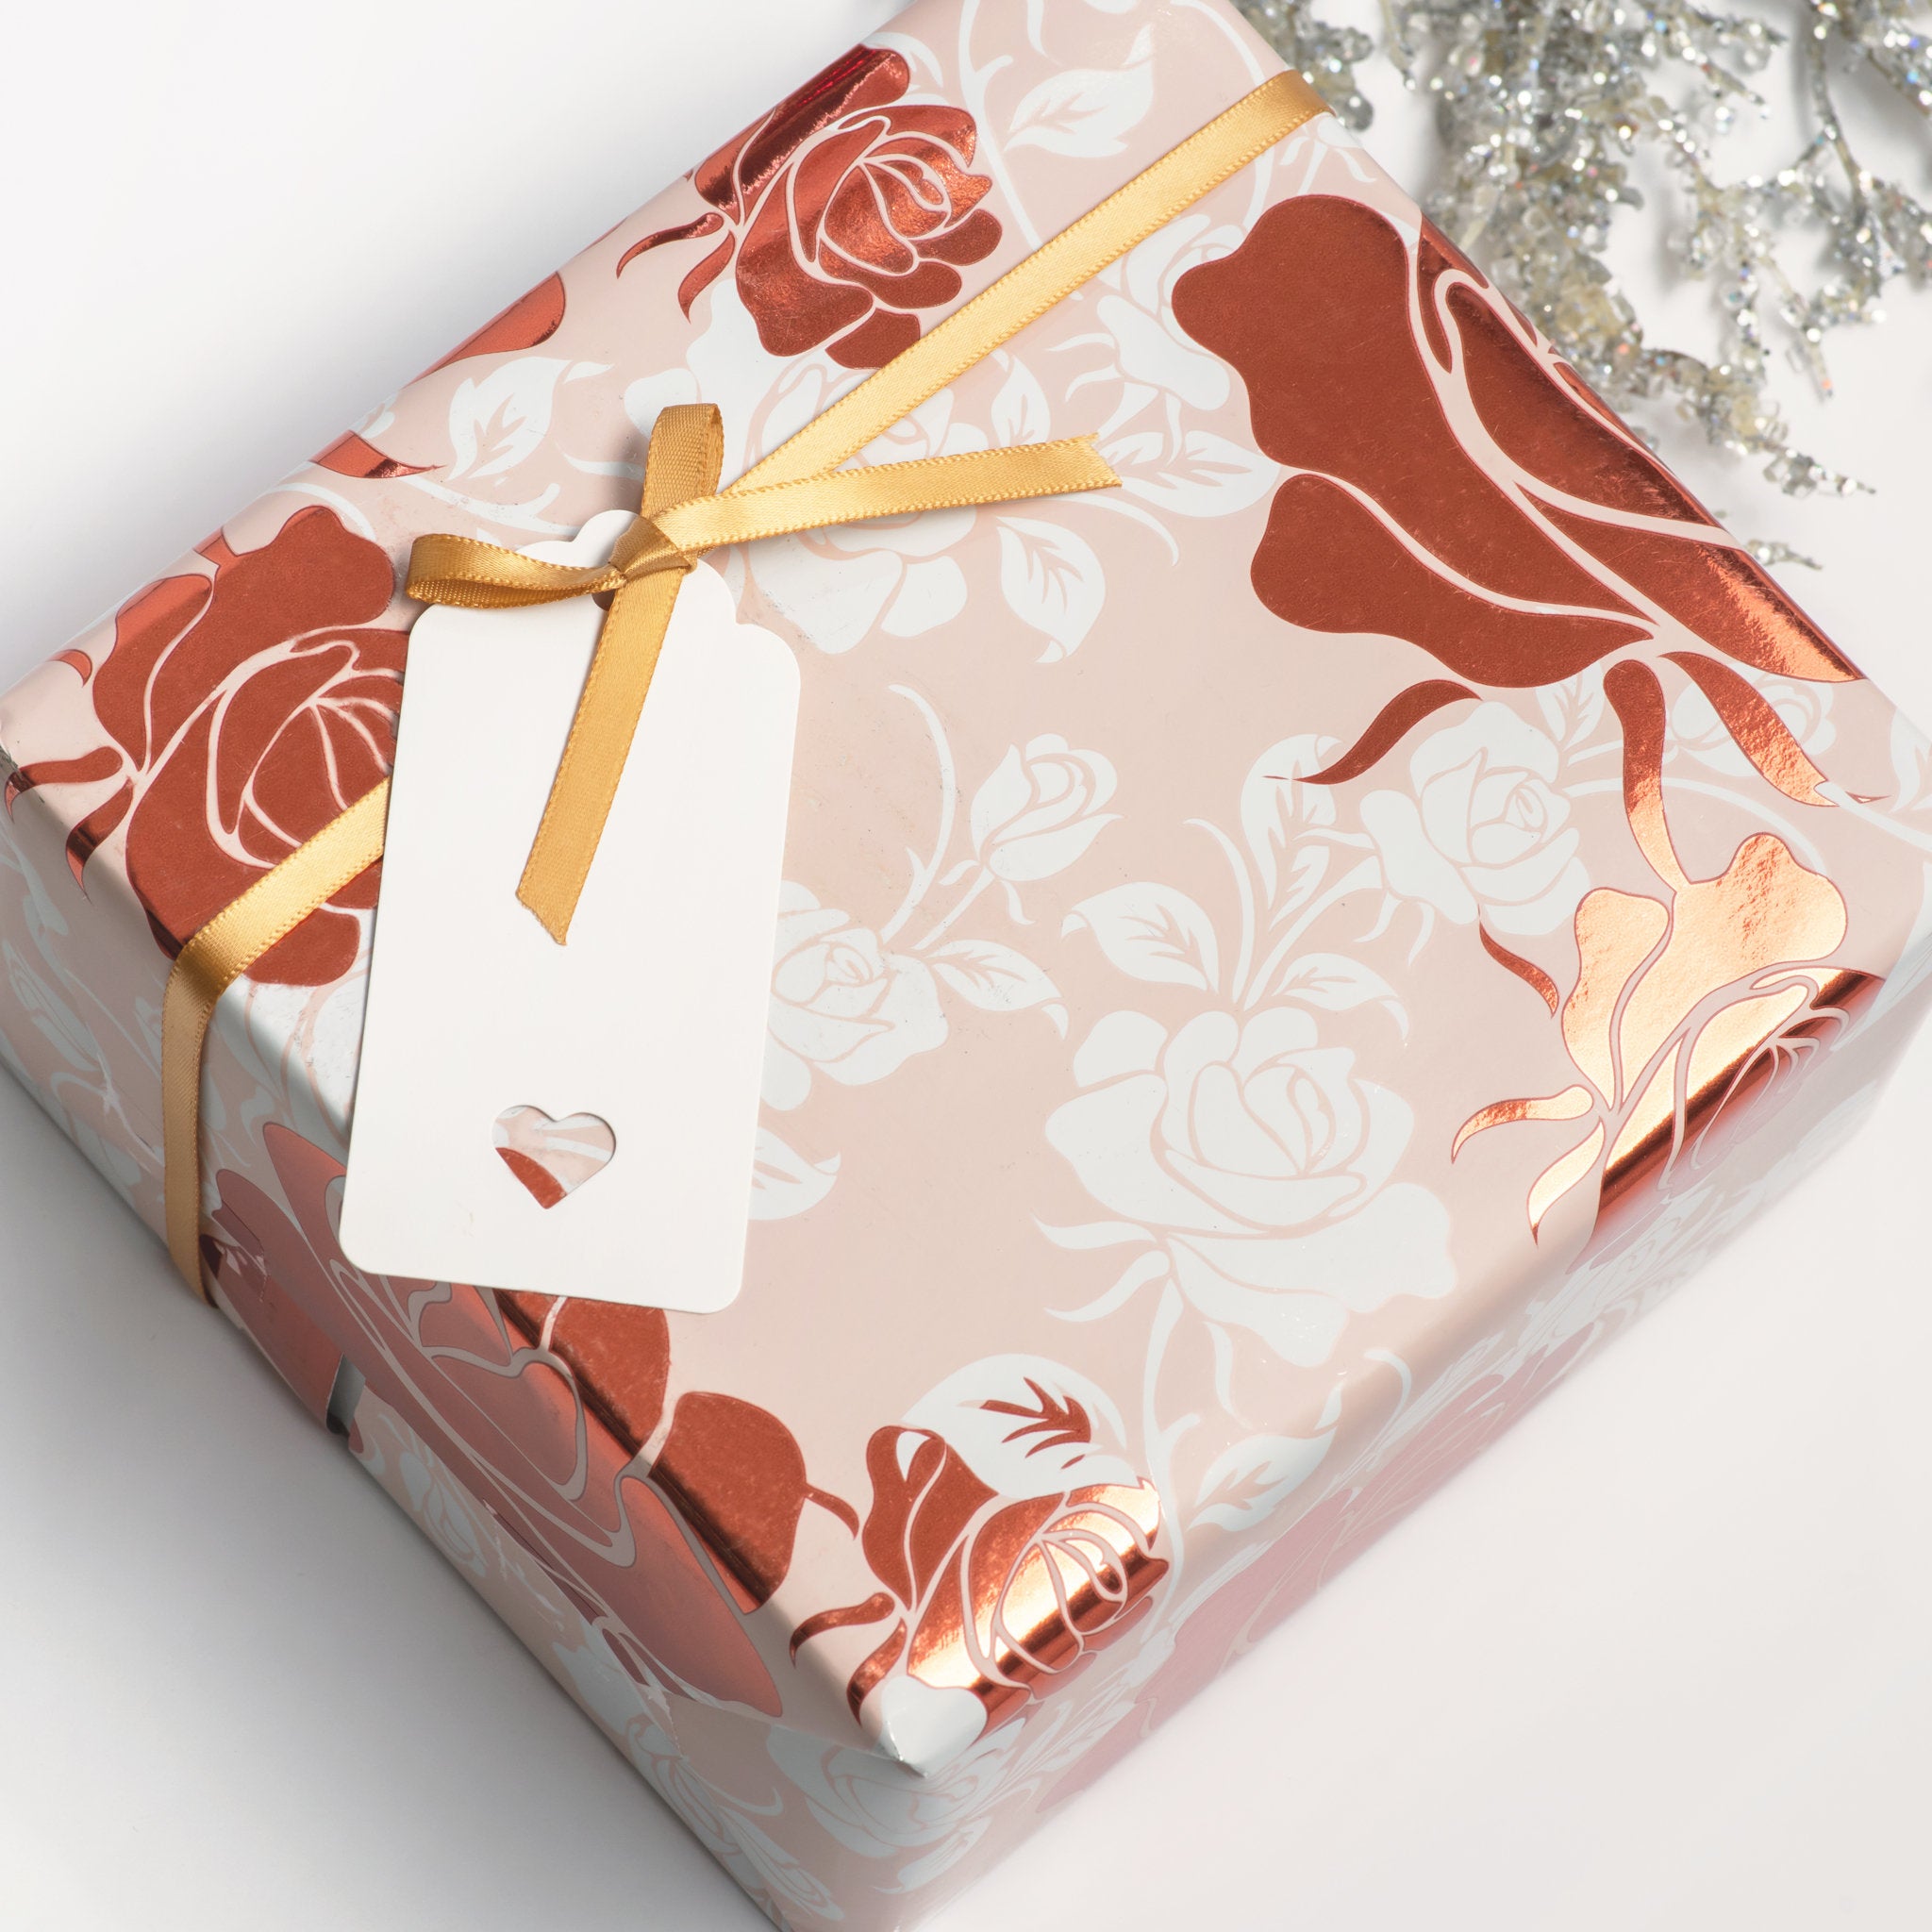 Gift Wrap Only, Add Gift Wrap To Any Order